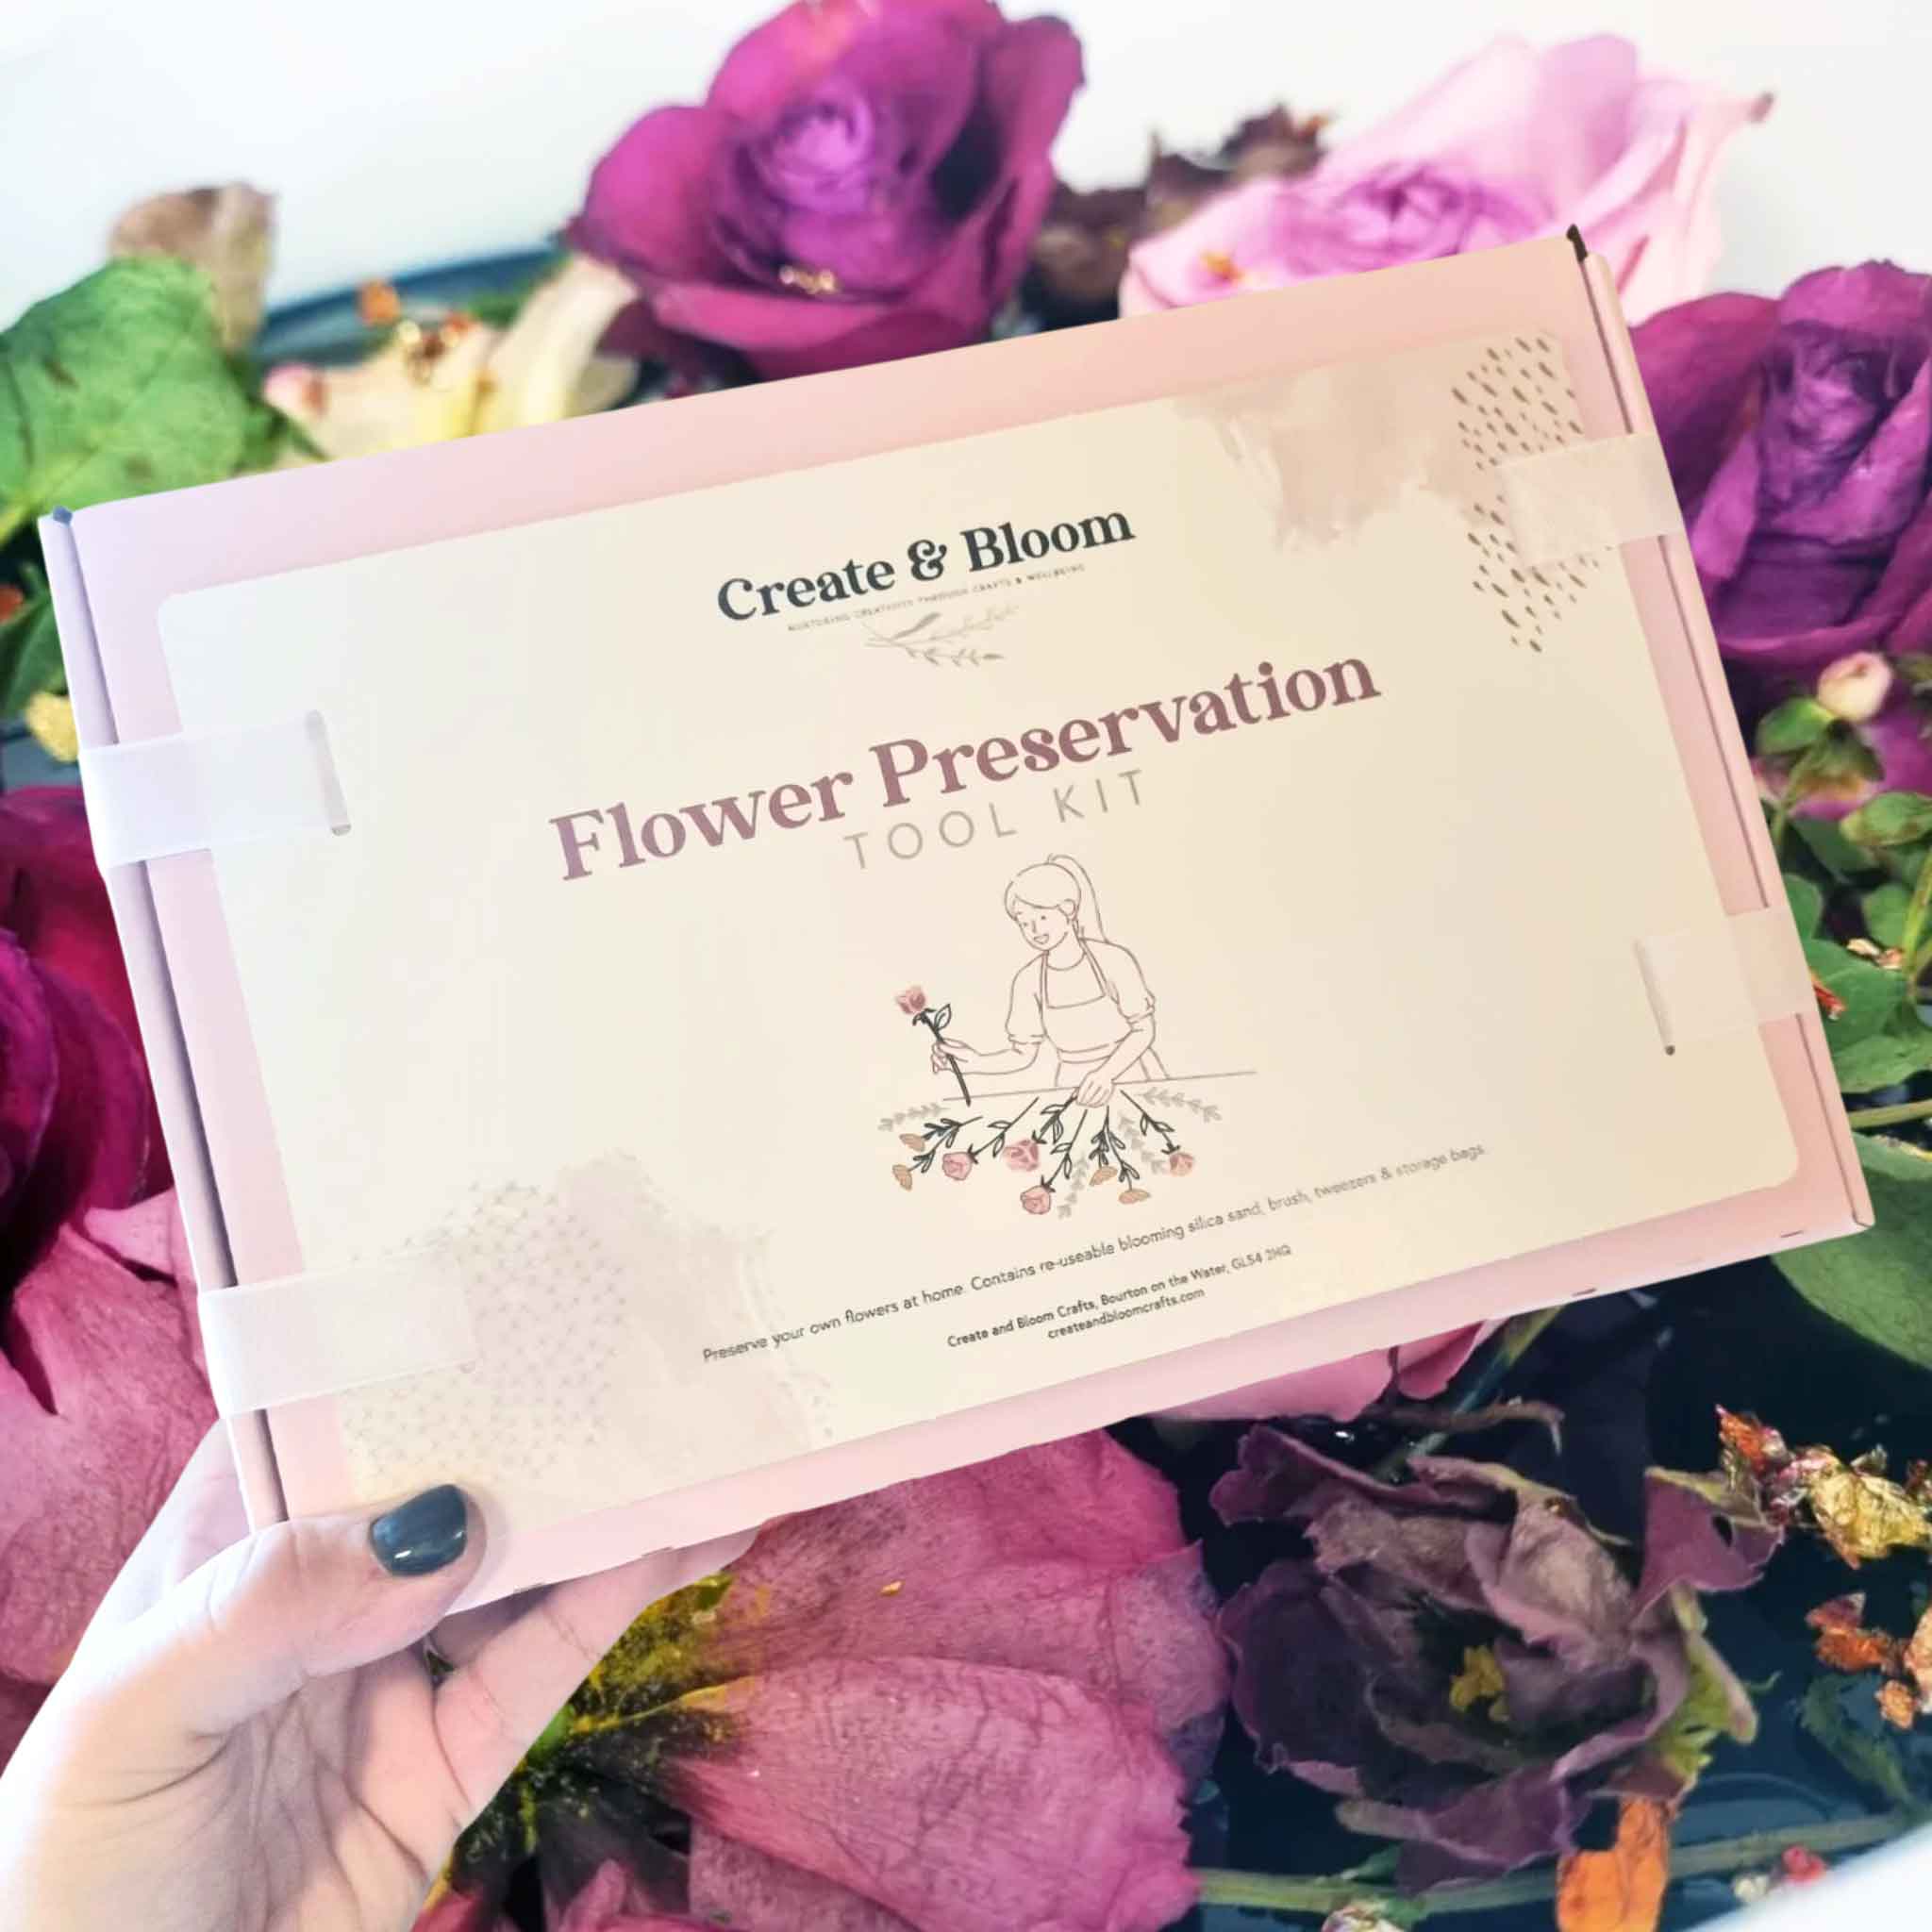 Maldives Art resin - EPOKE Flora Preserve - Flower drying Silica (750g)  520/- While there are many ways to dry and preserve flowers, EPOKE Flora  Preserve flower drying crystals can be more